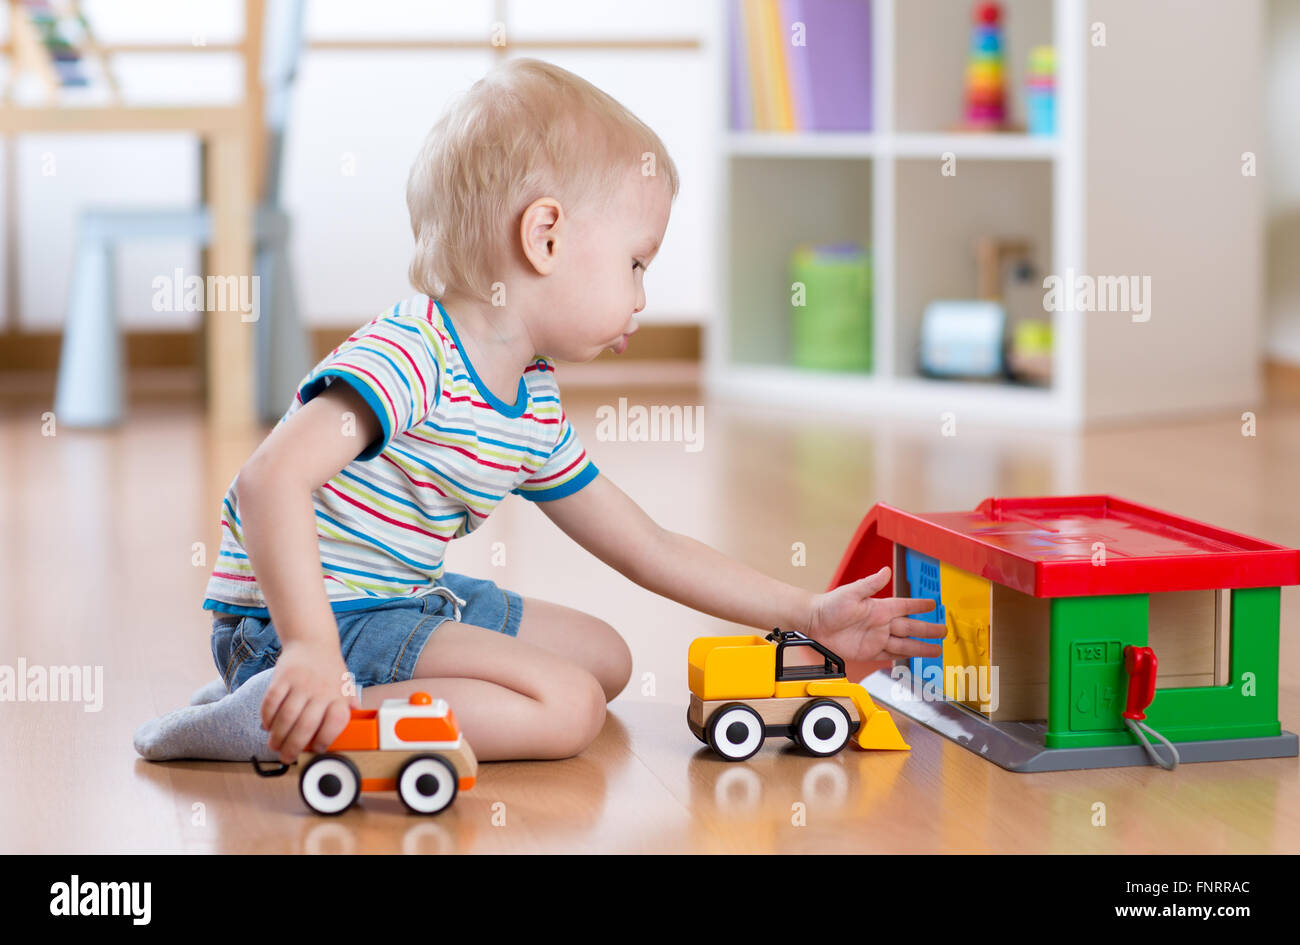 Little blond toddler kid boy plays with toy car Stock Photo